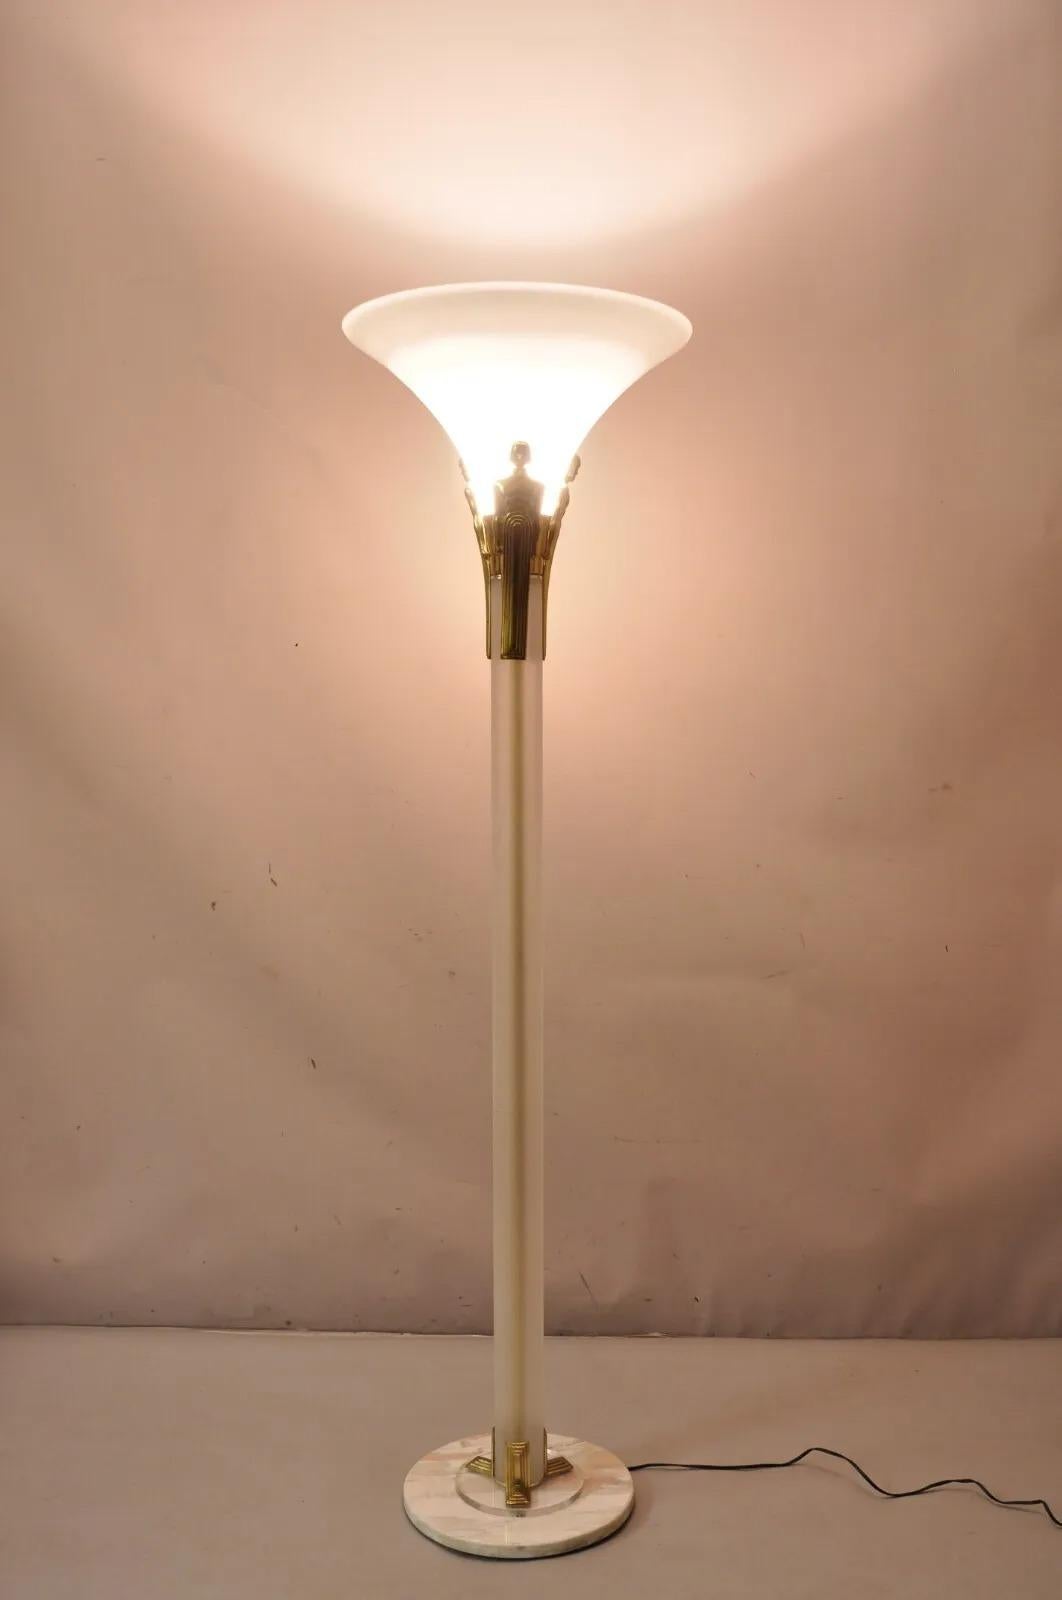 Vintage Art Deco Style Figural Frosted Acrylic and Glass Torchiere Floor Lamp For Sale 6